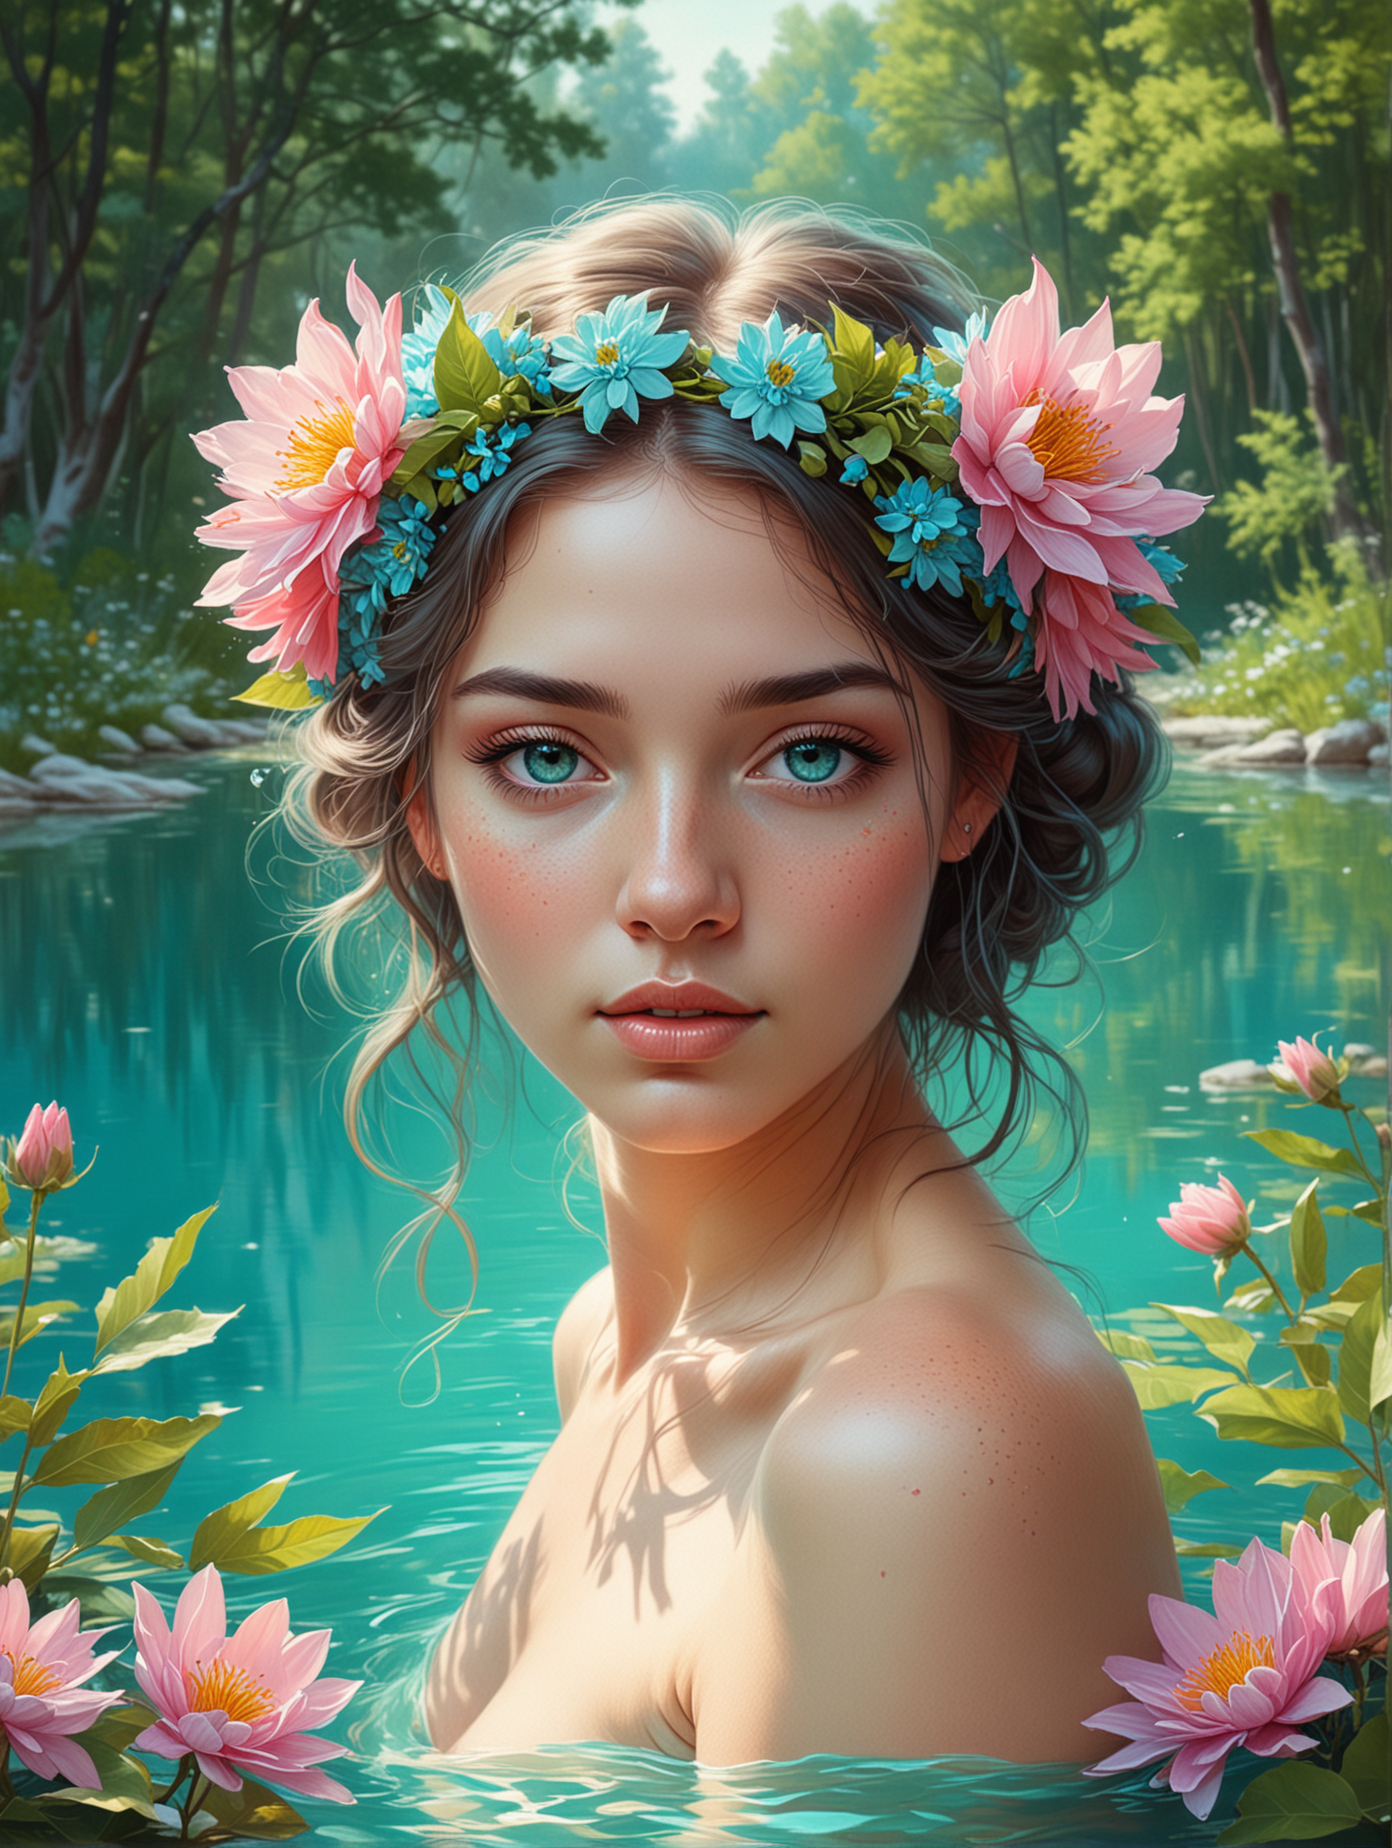 Illustration of a beautiful nymph, bright turquoise lake, trees, flowers, portrait 